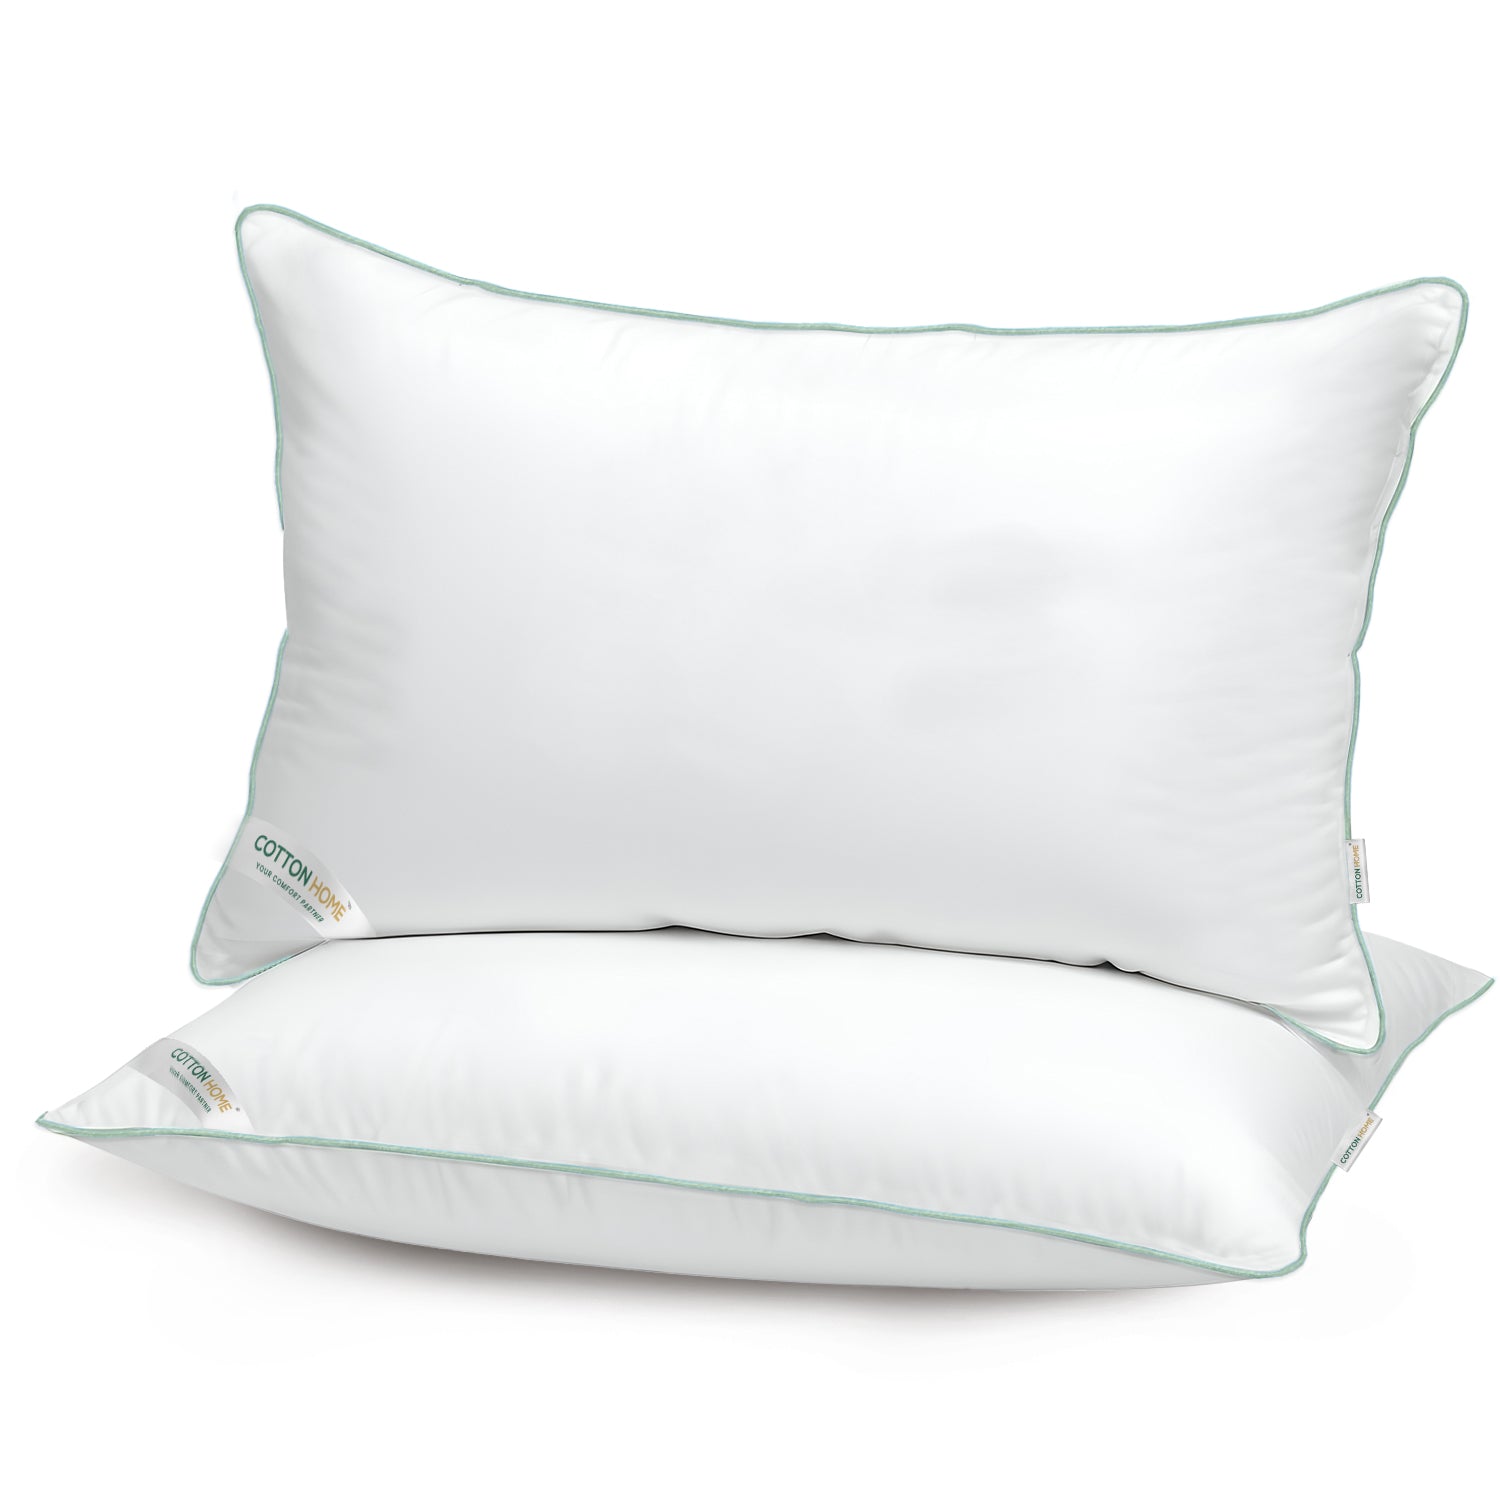 Pack of 2 Premium Bamboo Silk Pillow 50x75cm - White with Mint Cord